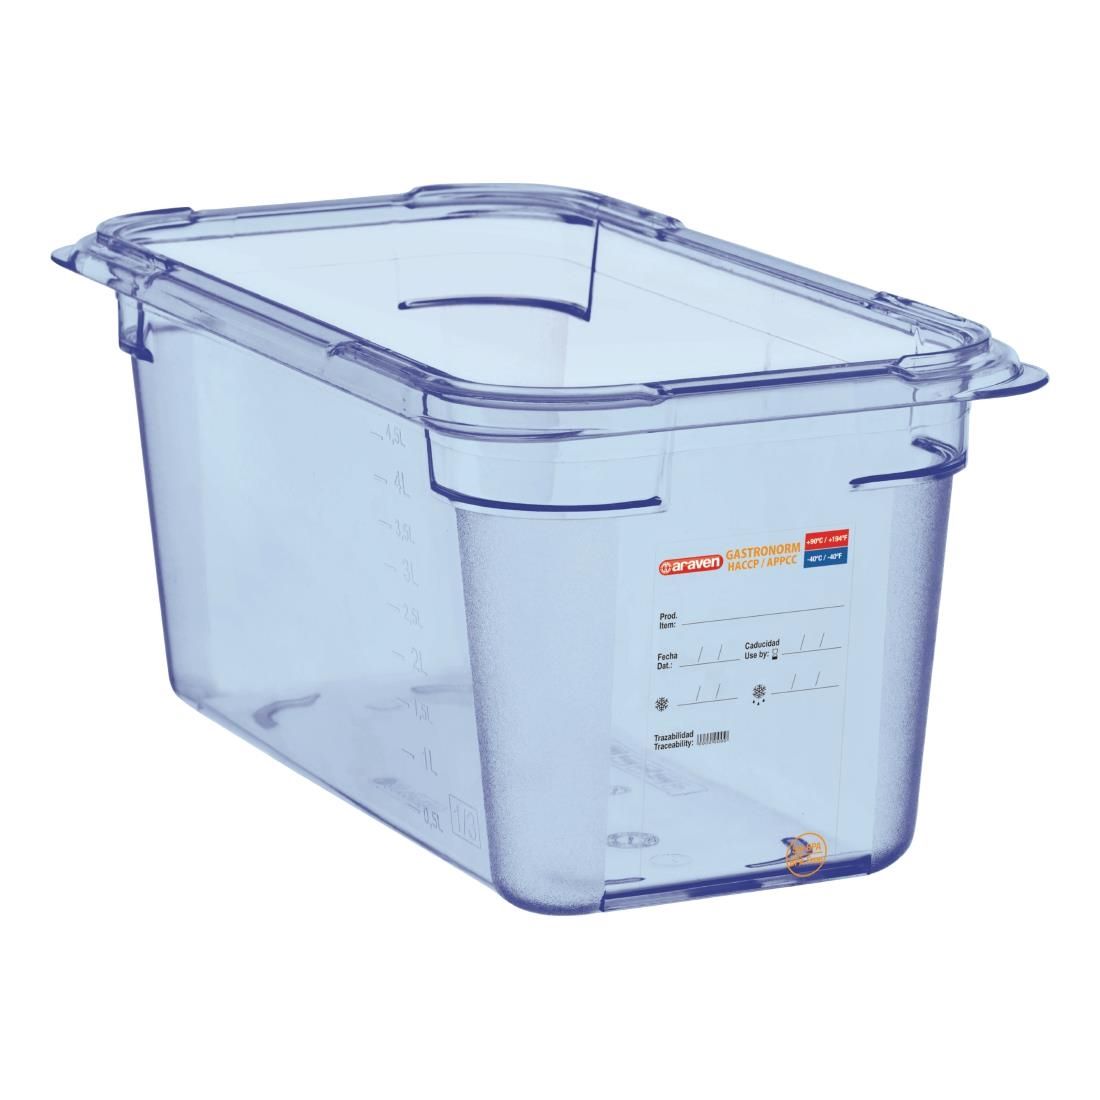 GP576 Araven ABS Food Storage Container Blue GN 1/4 150mm JD Catering Equipment Solutions Ltd